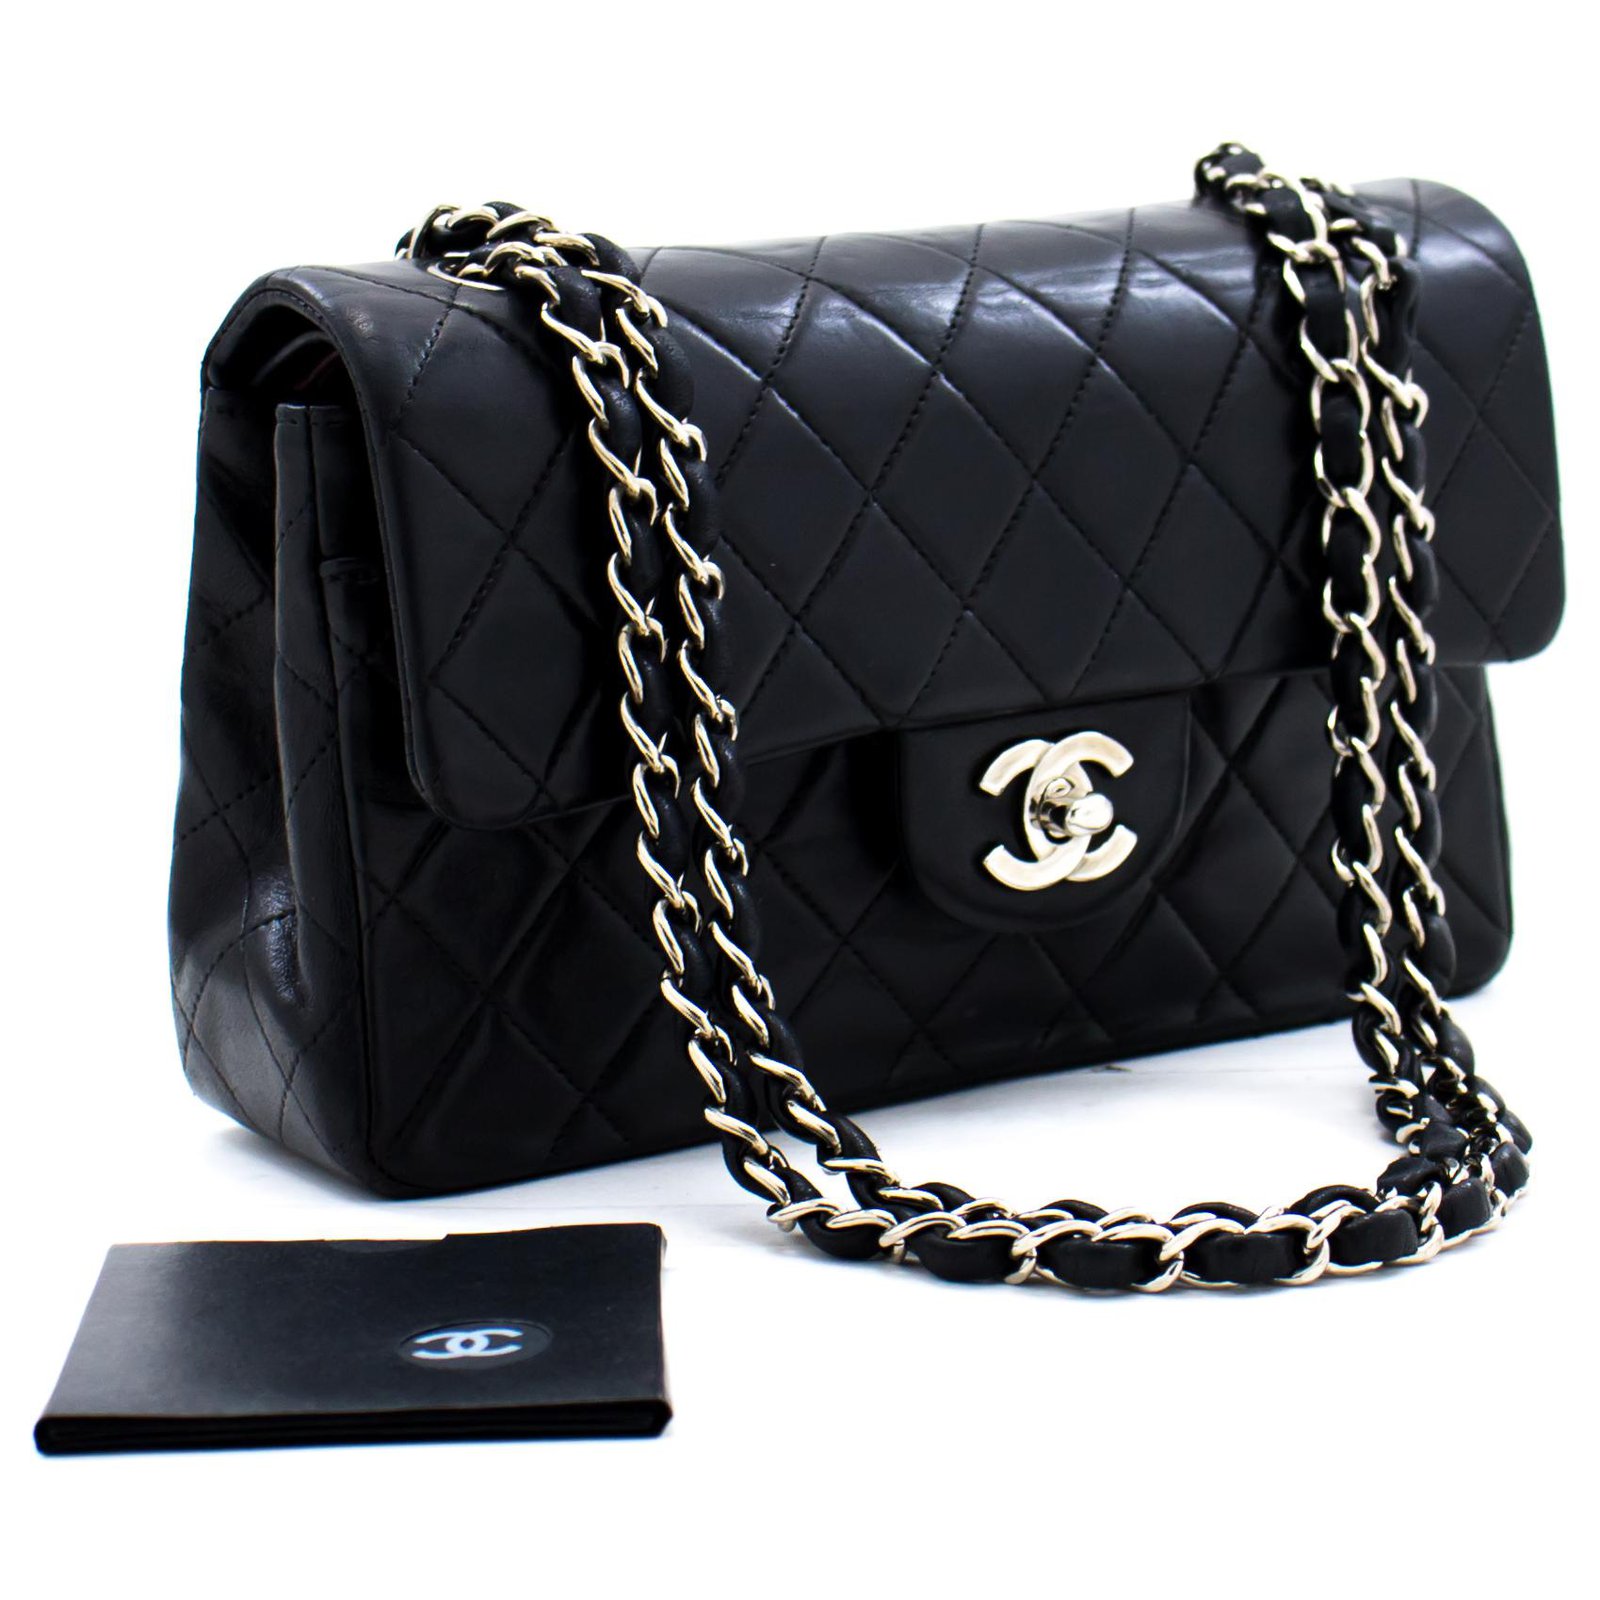 Chanel 2.55 lined Flap Small Silver Chain Shoulder Bag Black Lamb